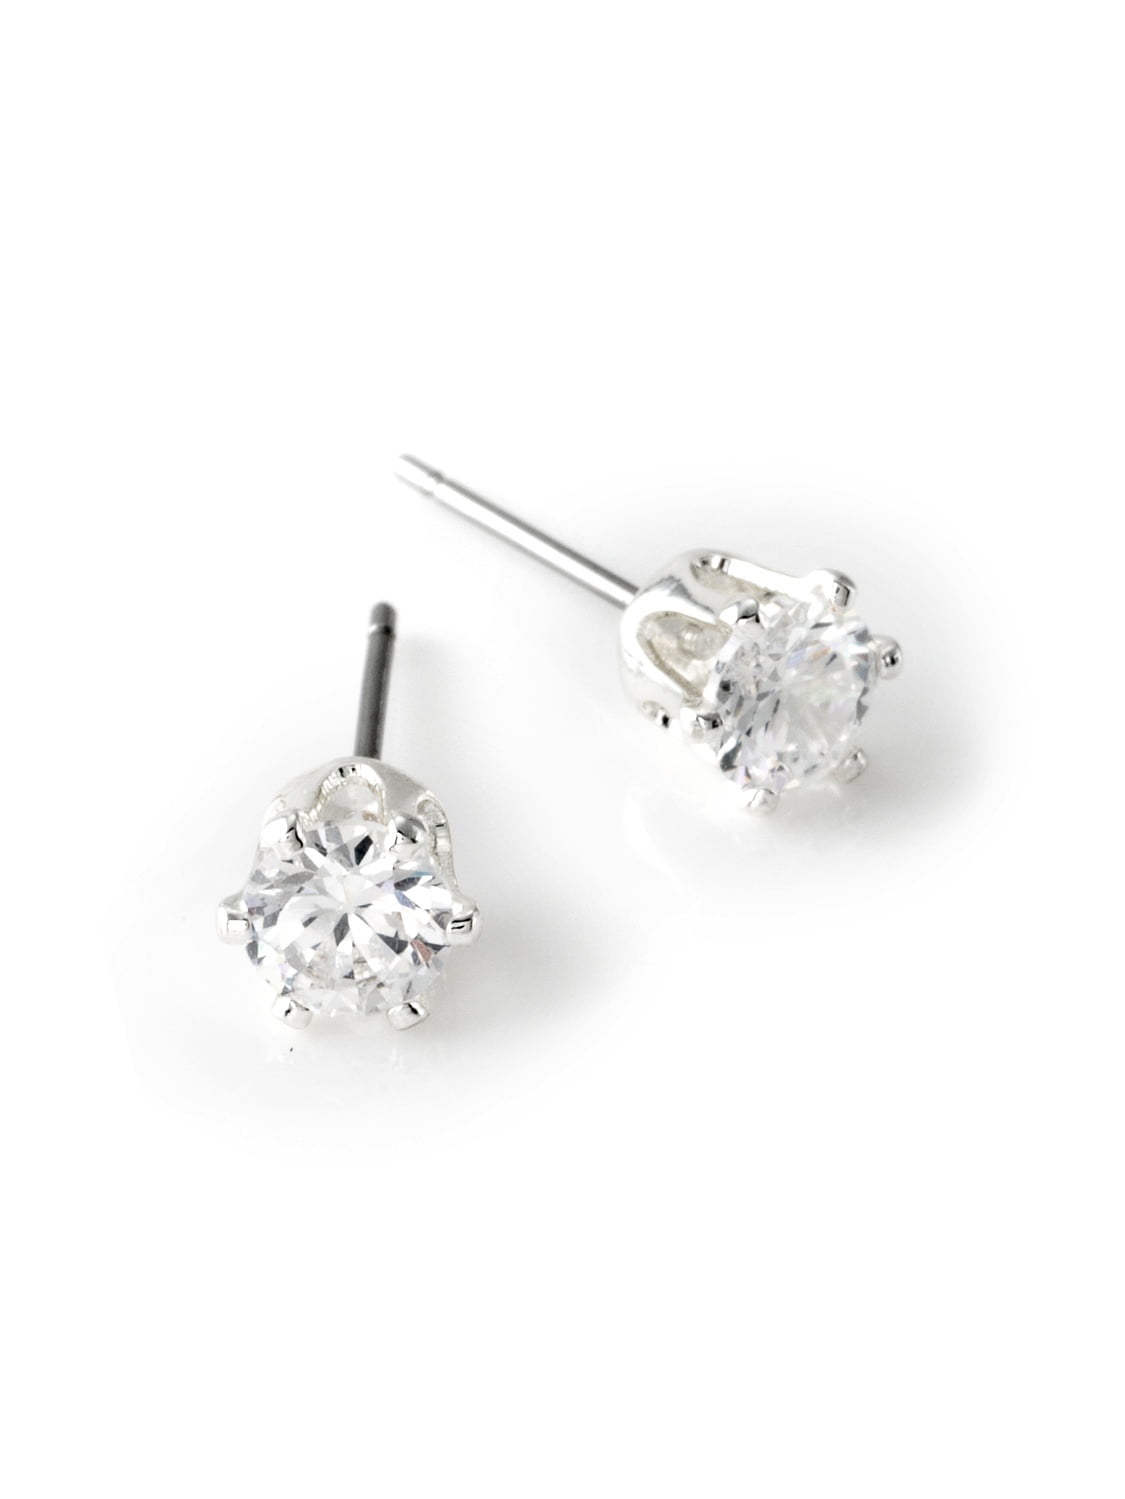 2pcs 7mm CZ wedding jewelry 2pcs Cubic Earrings NP-1480 Nickel Free Gold plated 925 sterling silver post